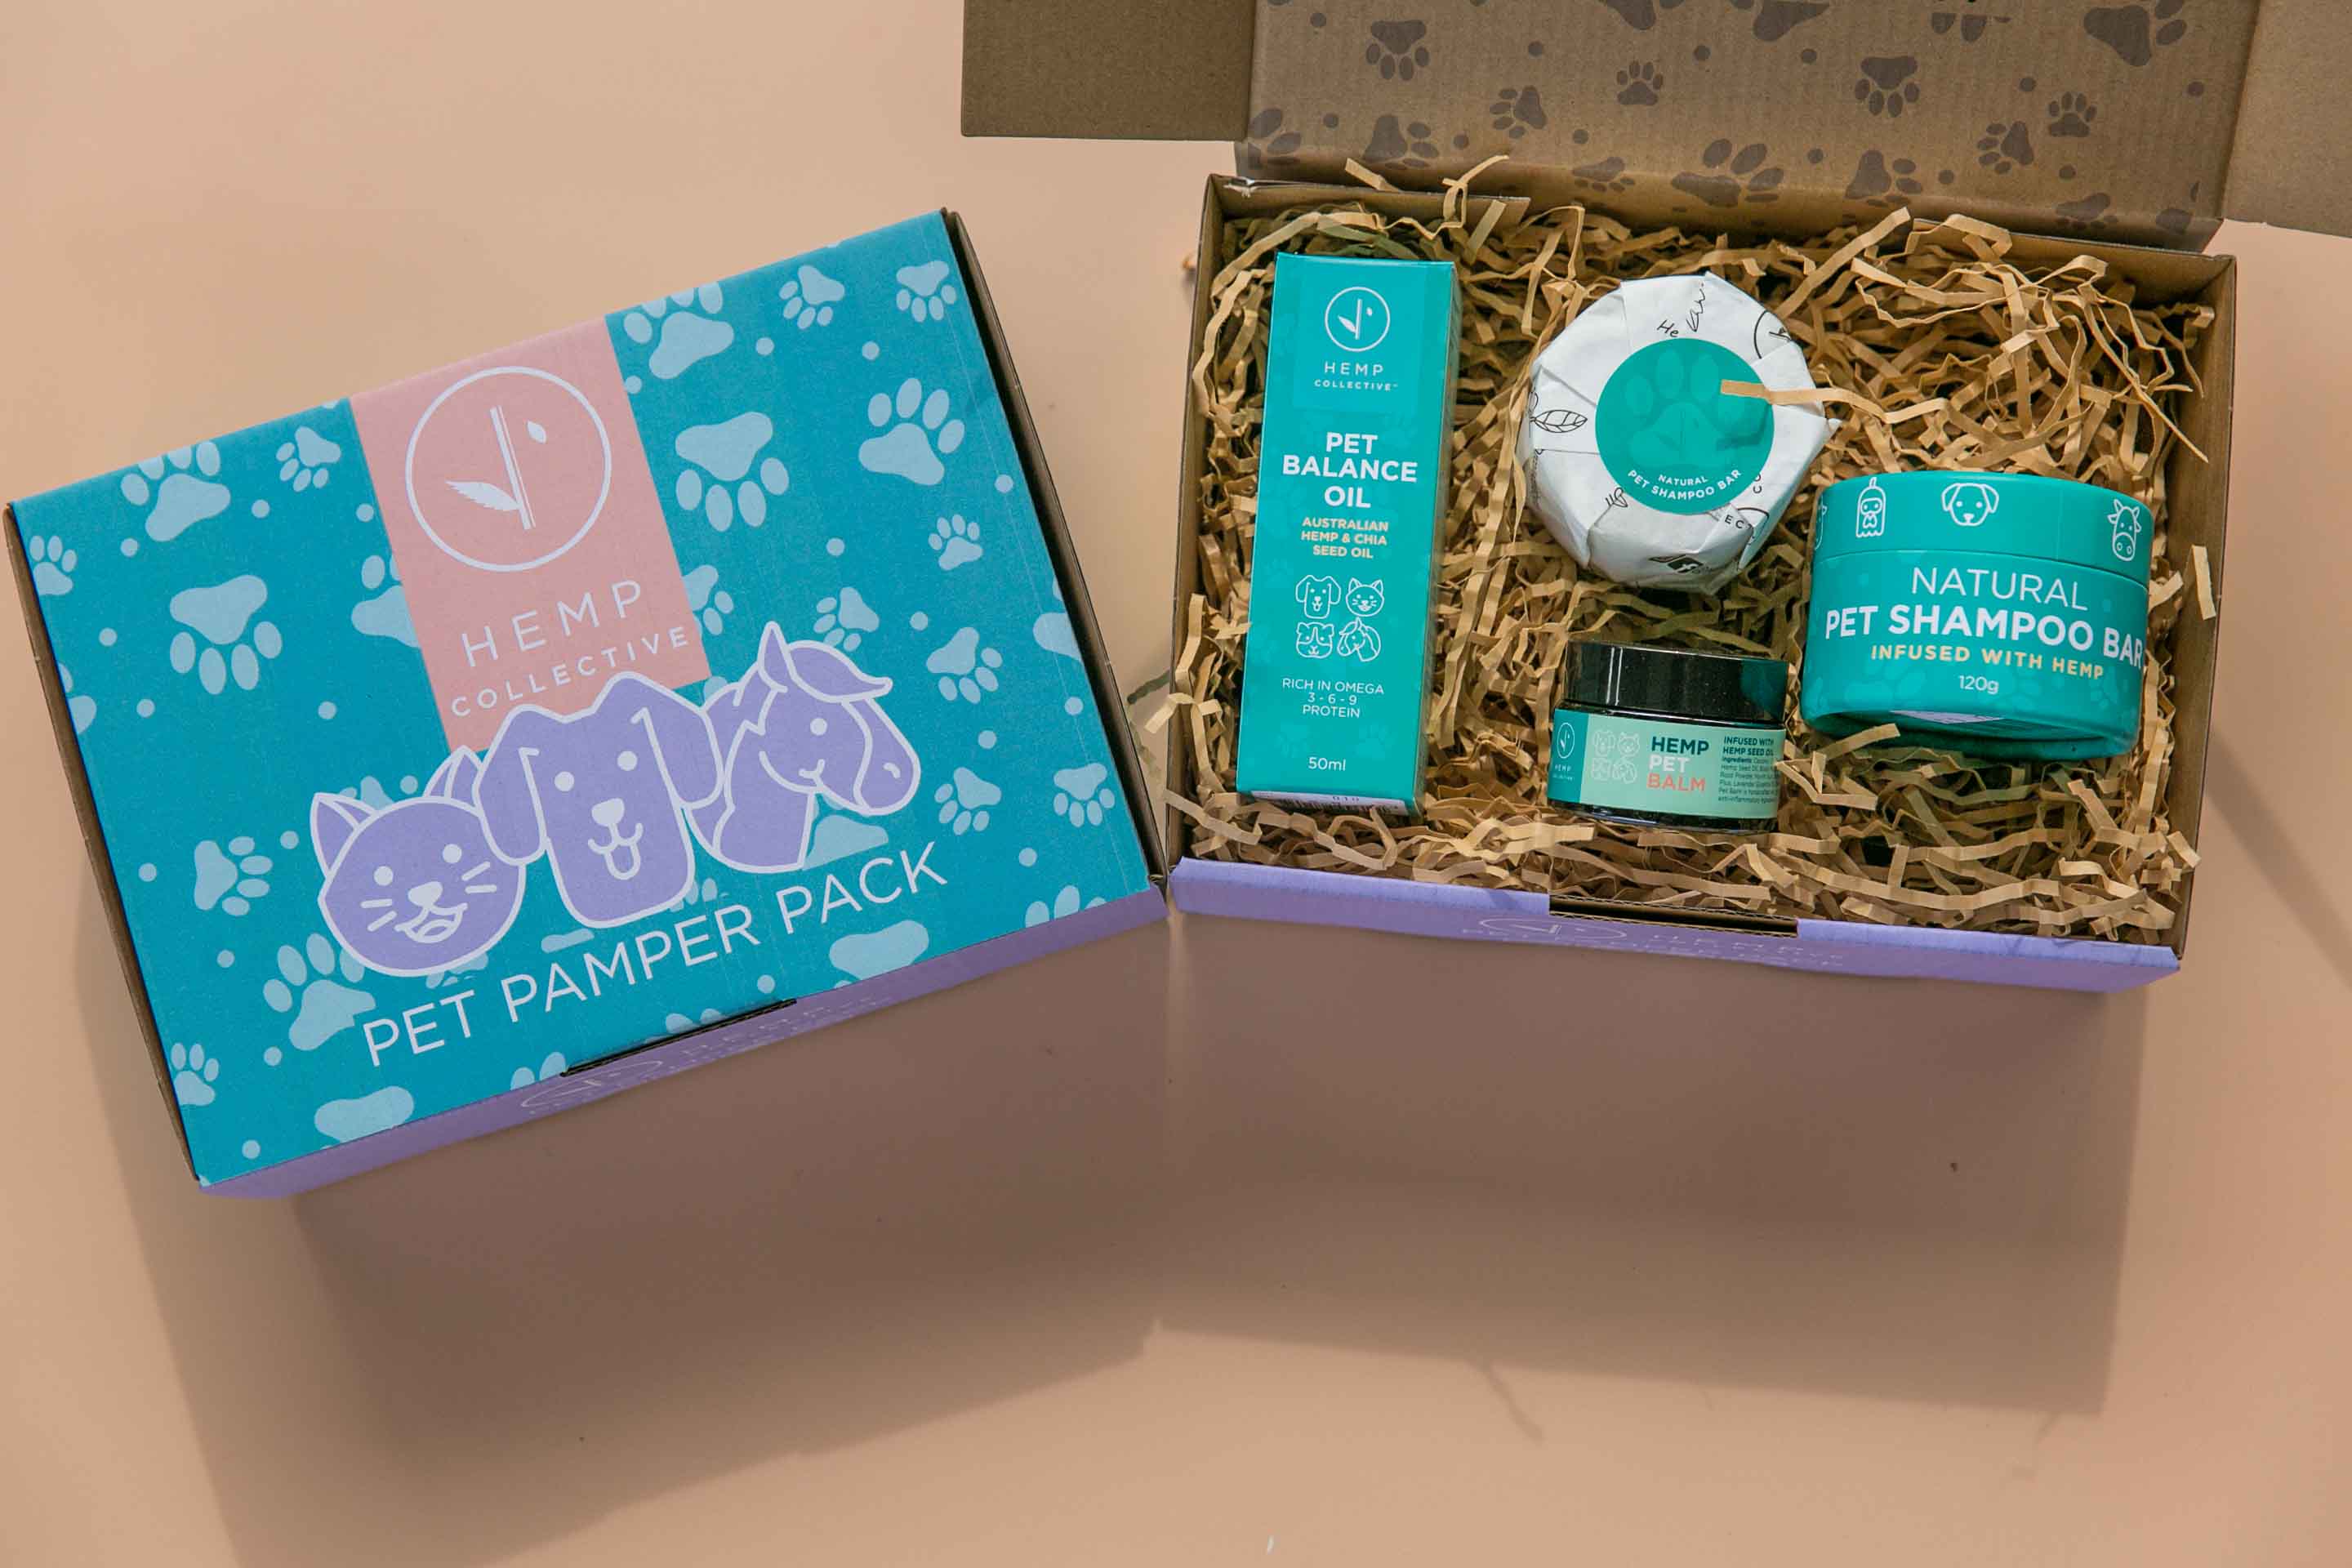 Pet Pamper Pack from The Hemp Collective